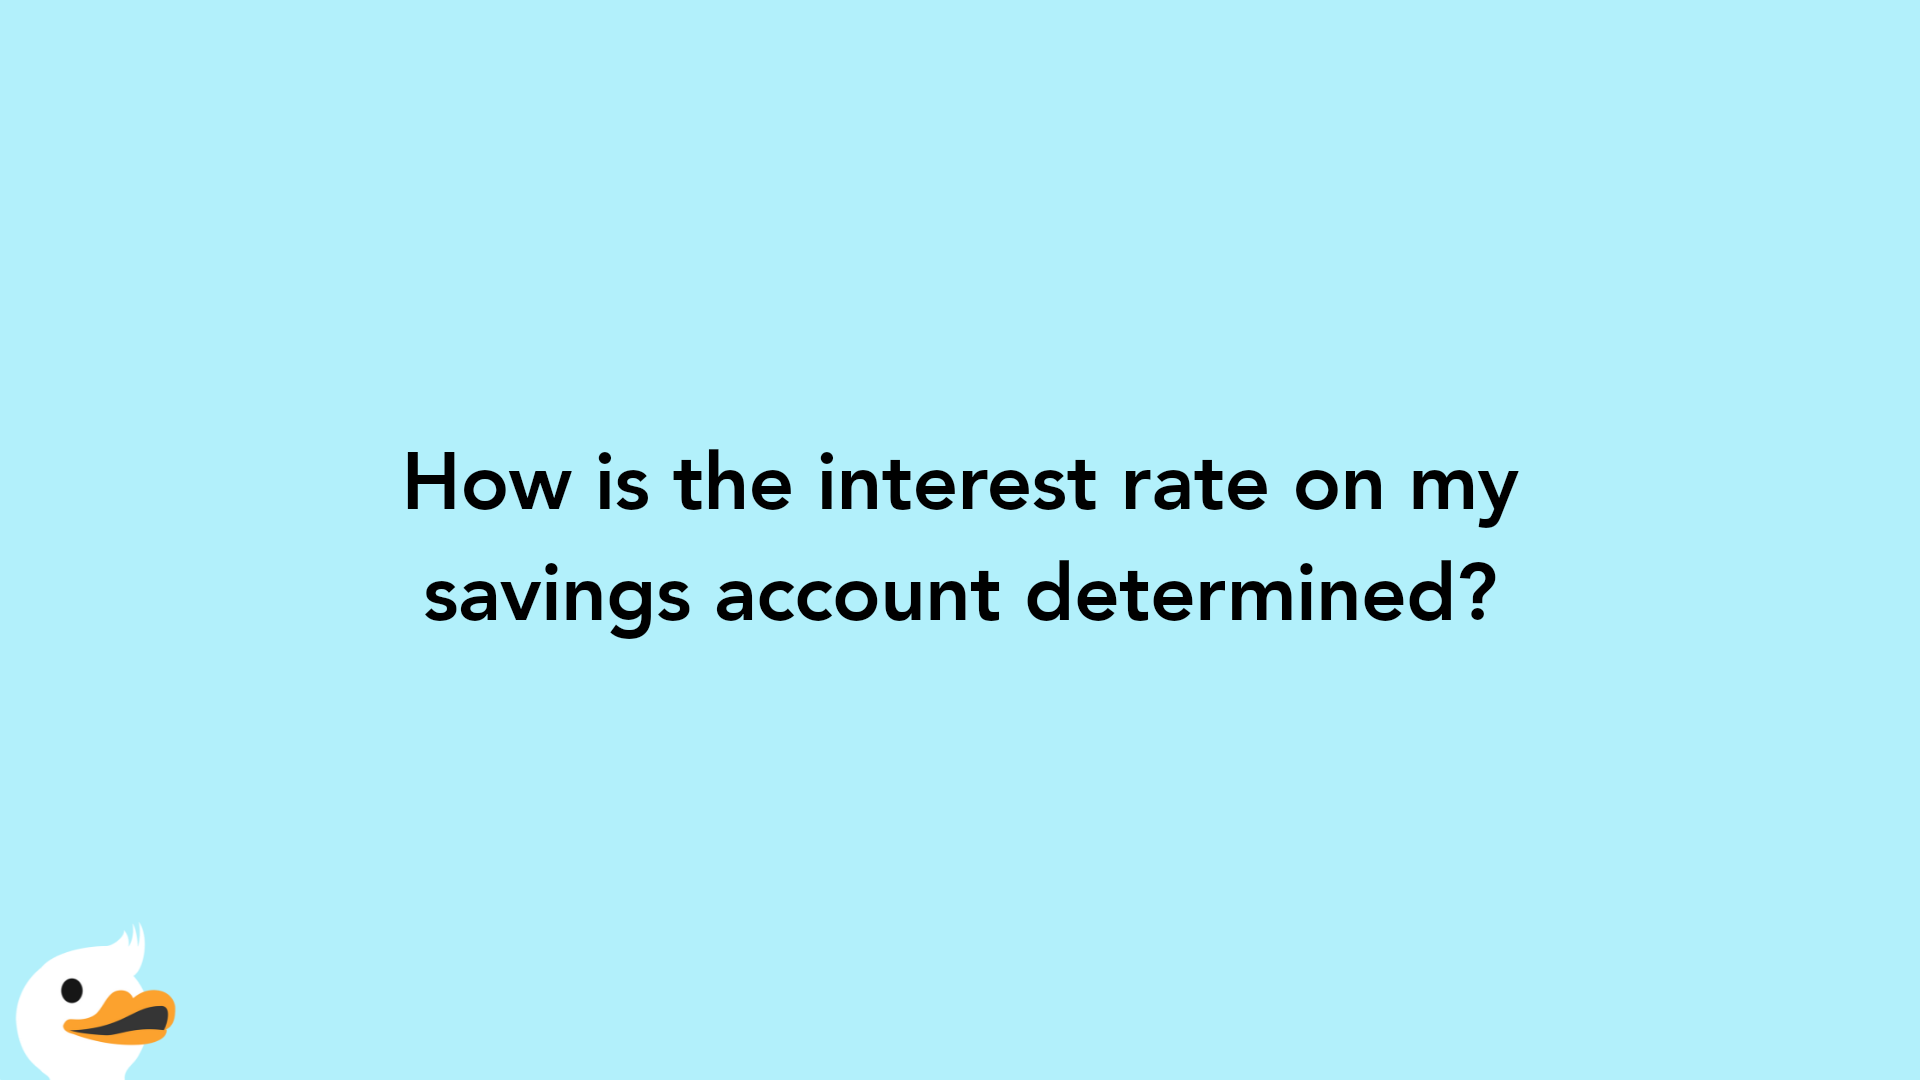 How is the interest rate on my savings account determined?